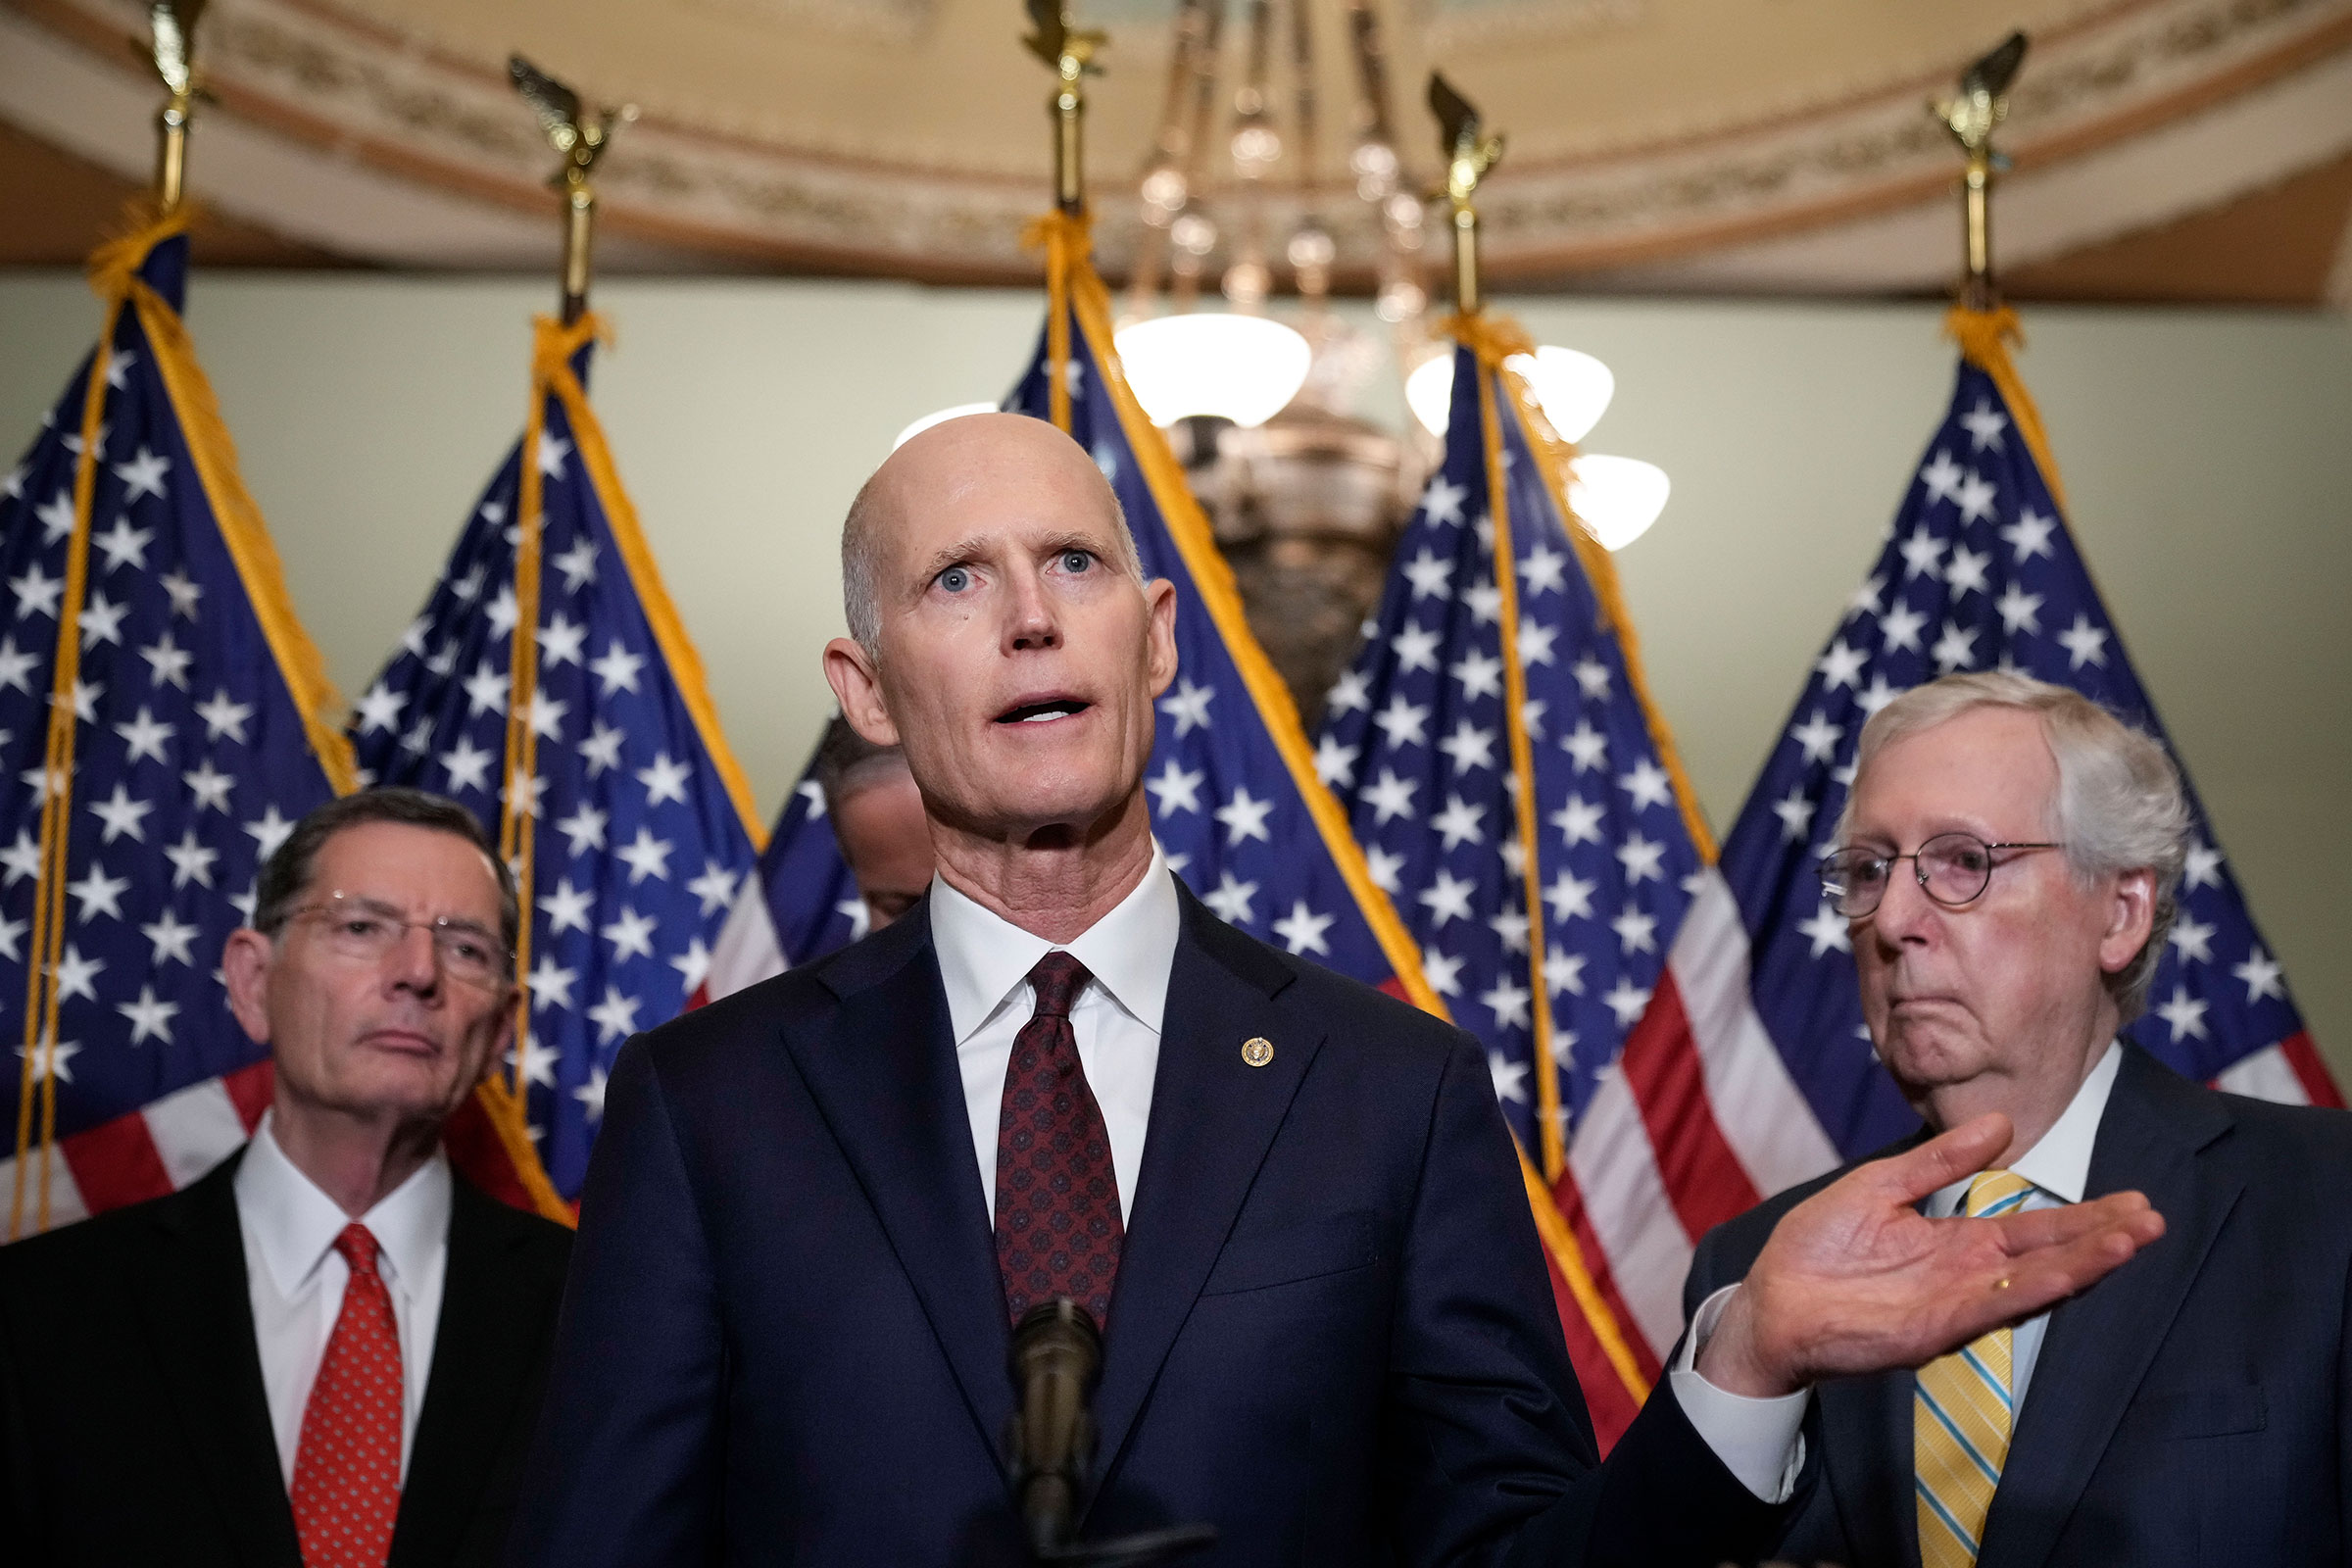 Flanked by Sen. John Barrasso and Senate Minority Leader Mitch McConnell, Sen. Rick Scott speaks during a news conference after a closed-door lunch with Senate Republicans at the Capitol on May 17, 2022. (Drew Angerer—Getty Images)